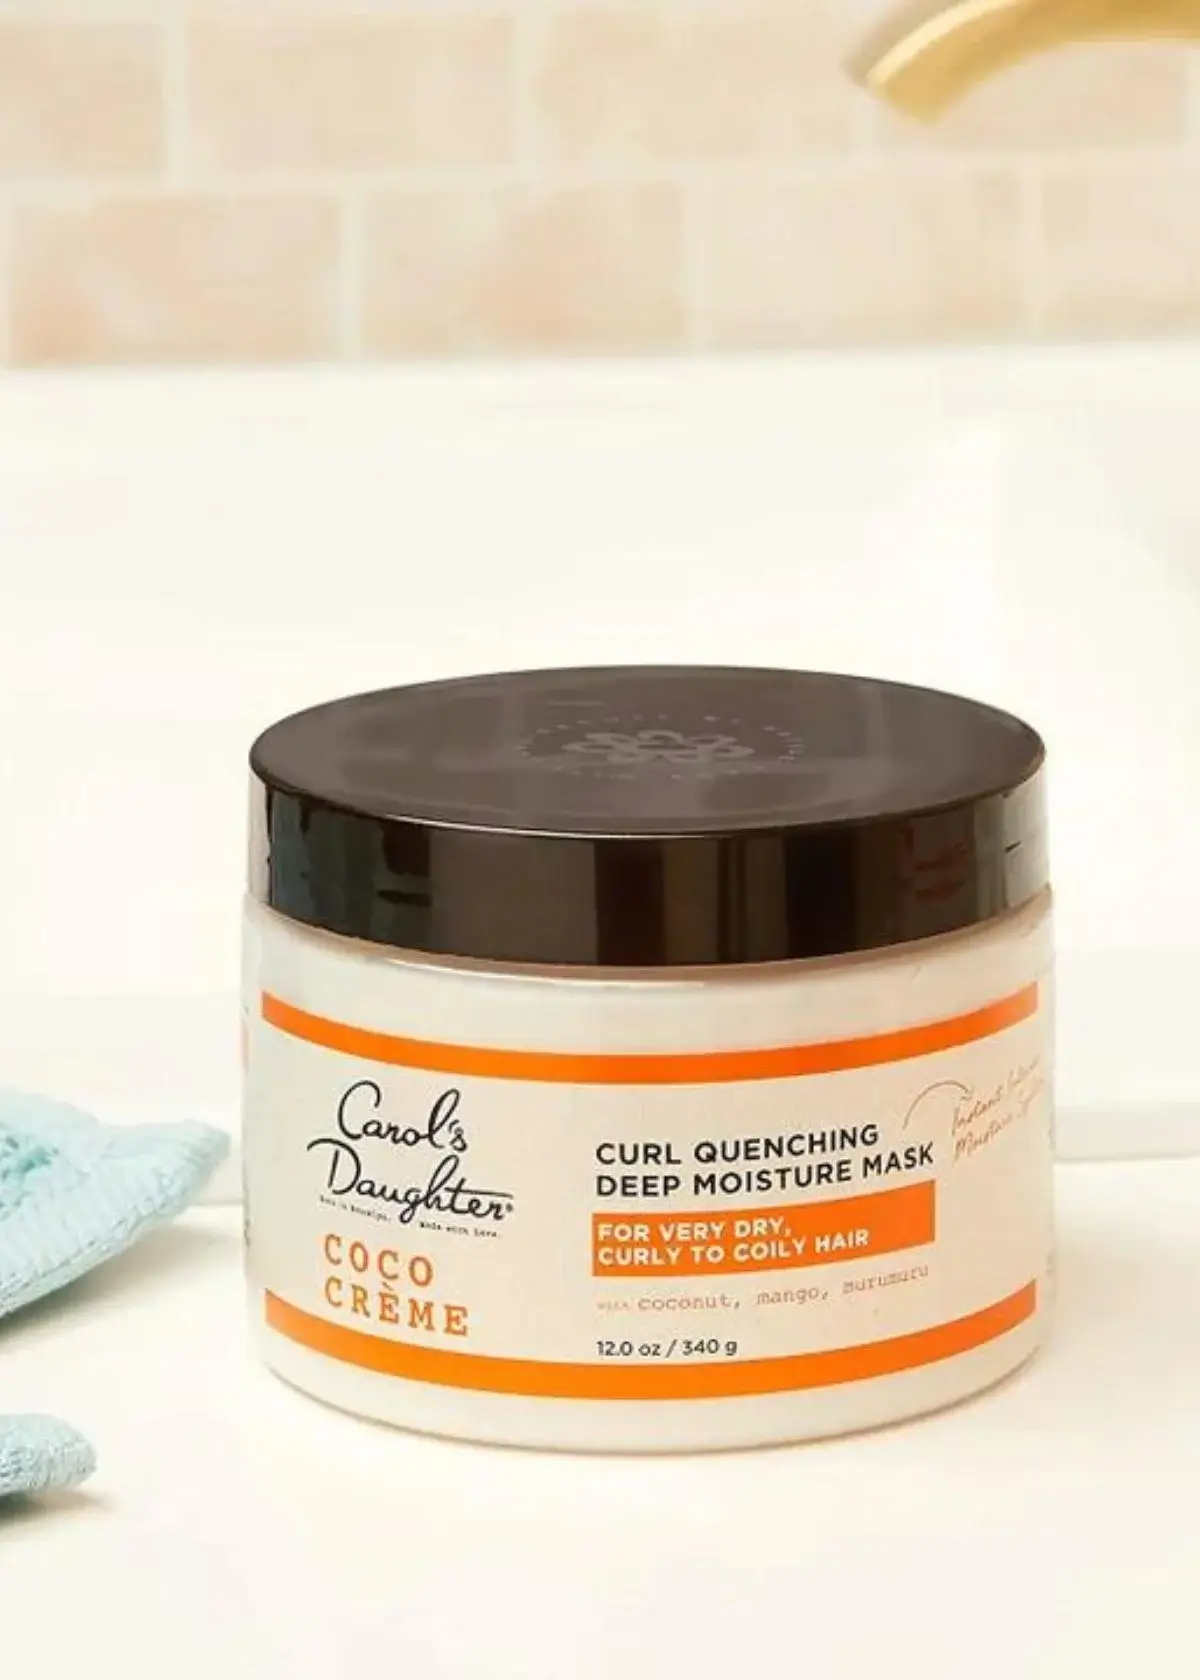 What ingredients should I look for in a good drugstore hair mask?